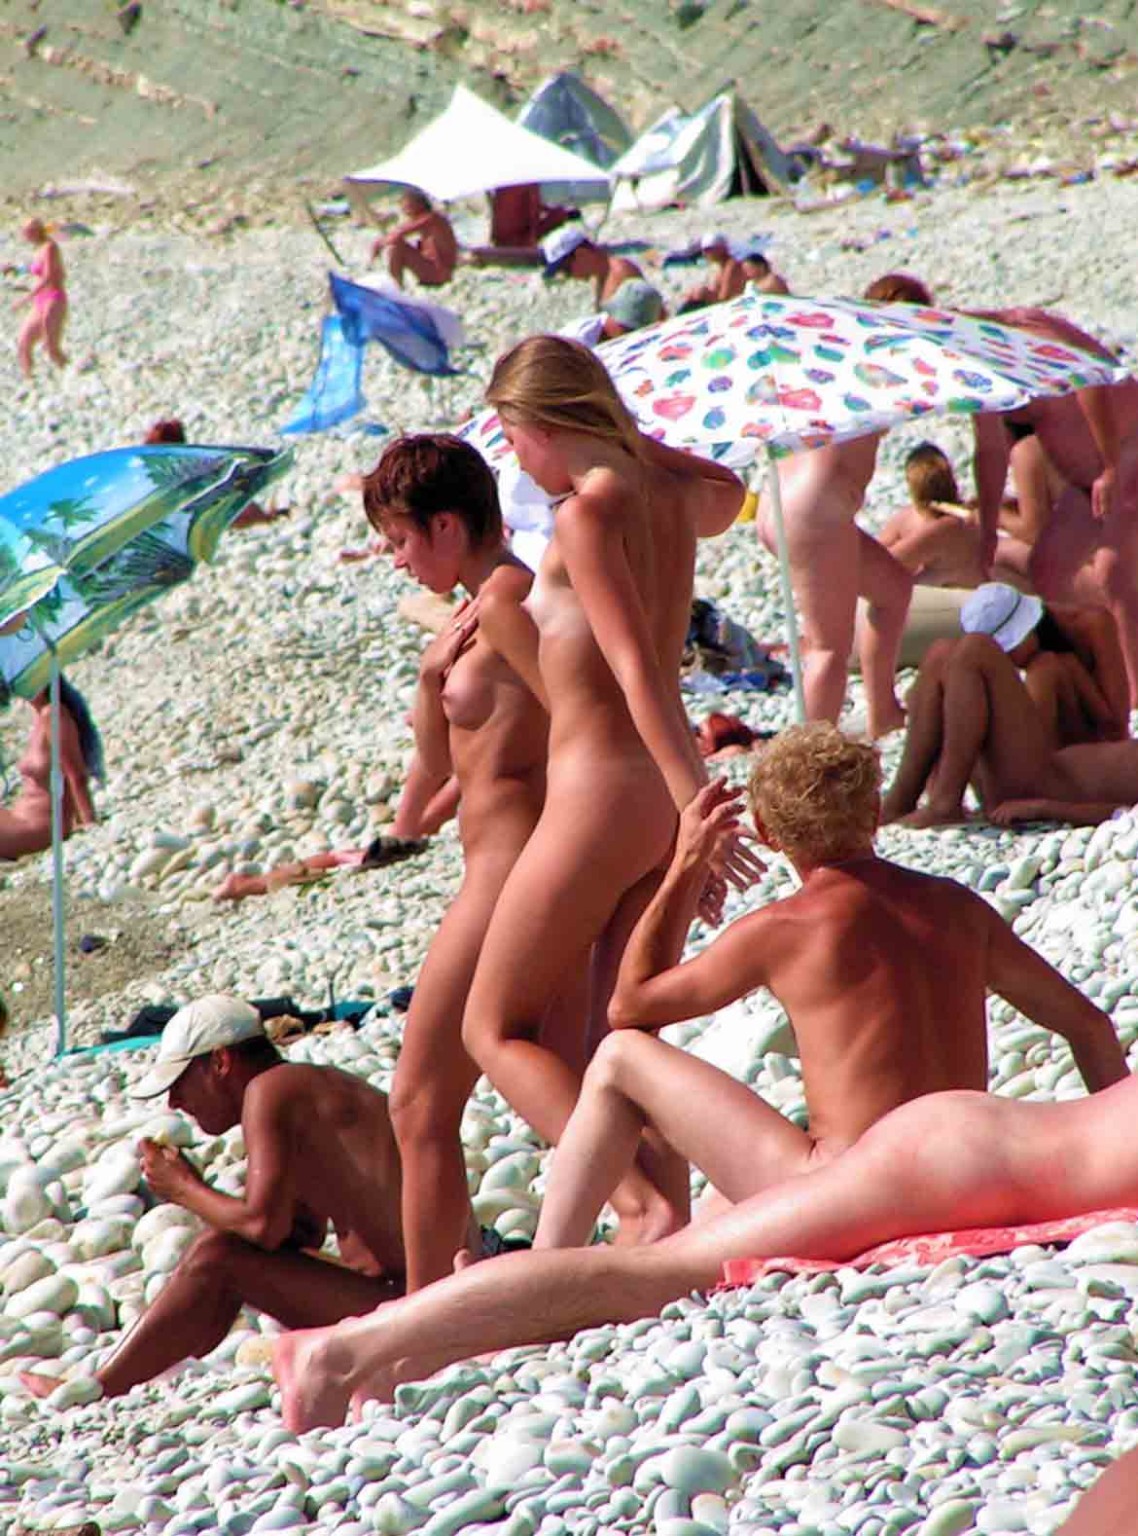 No chick at the nude beach is hotter than this one #72253449